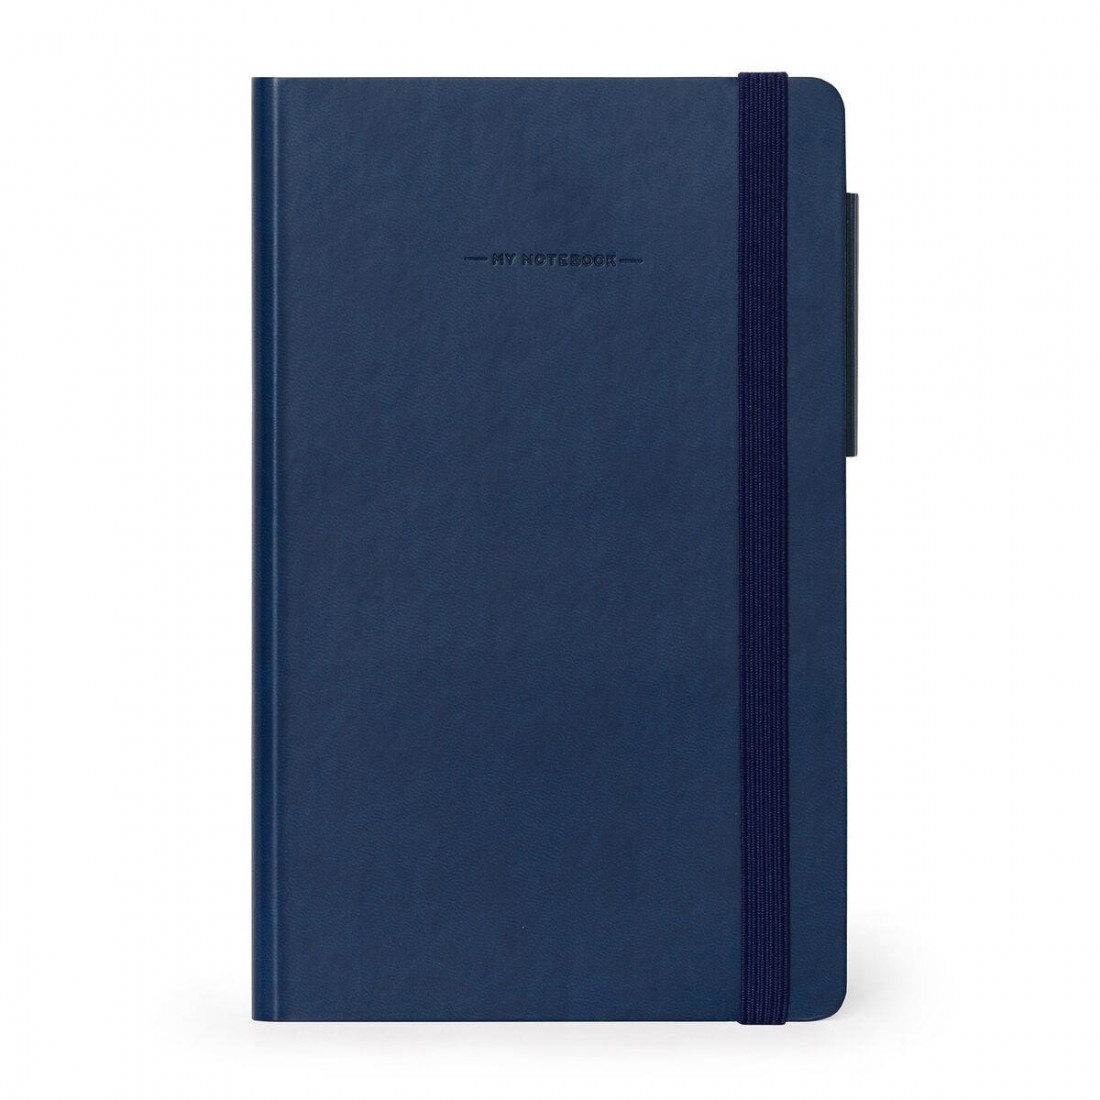 My Notebook - Lined - Medium - Blue Cover LEGAMI